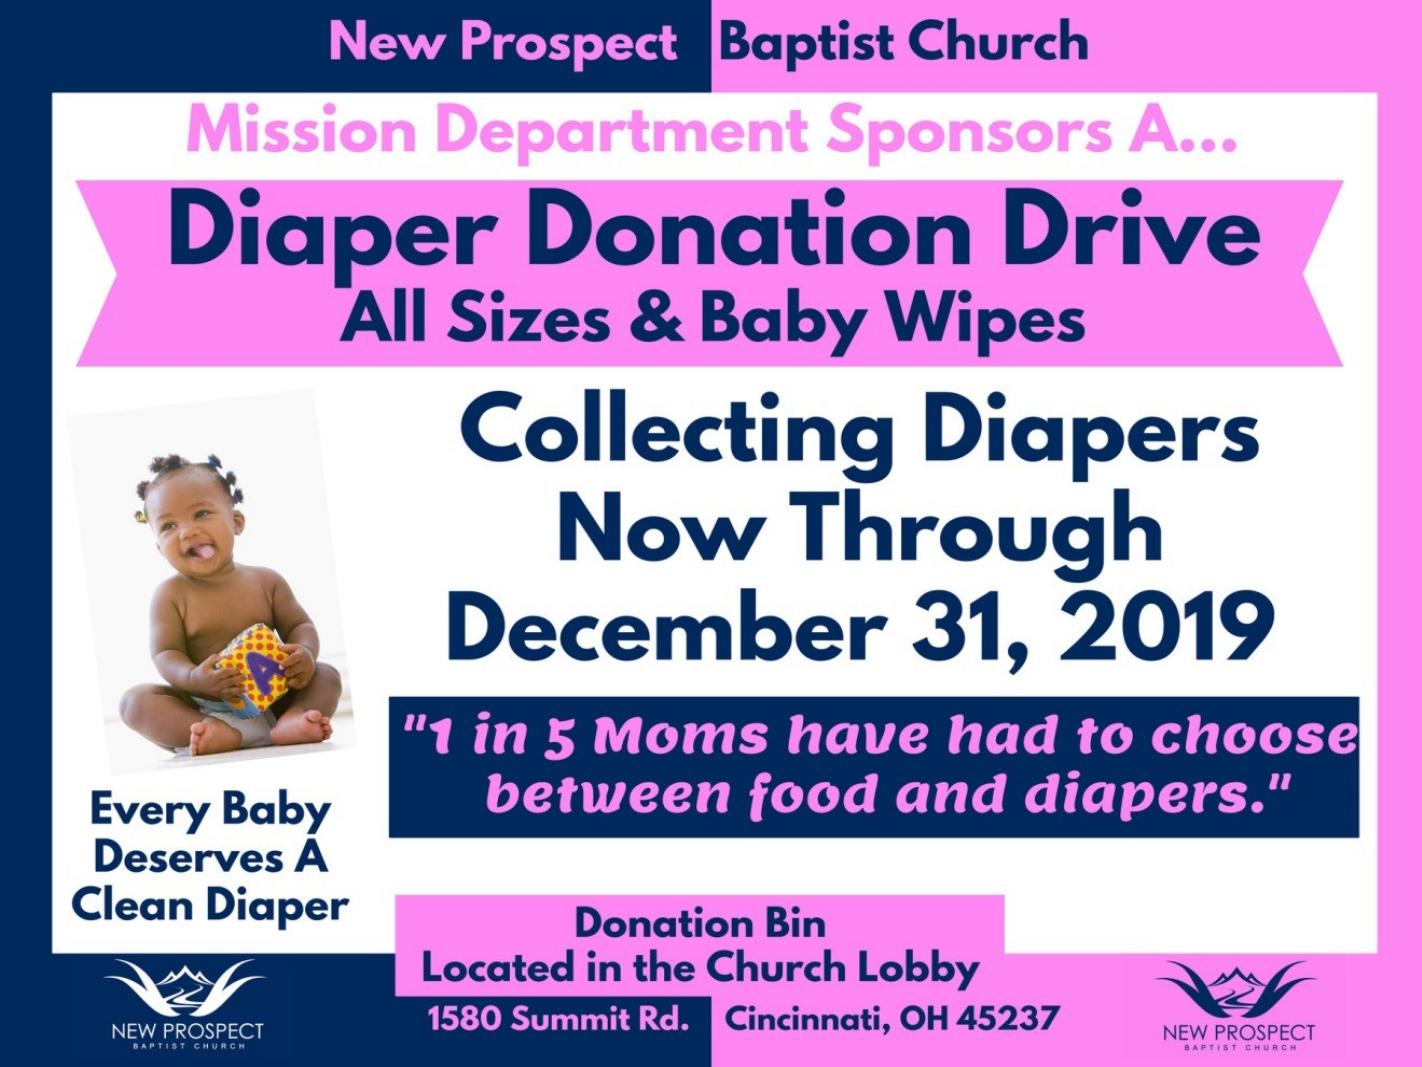 Diaper Donation Drive at New Prospect through Tuesday, December 31st.